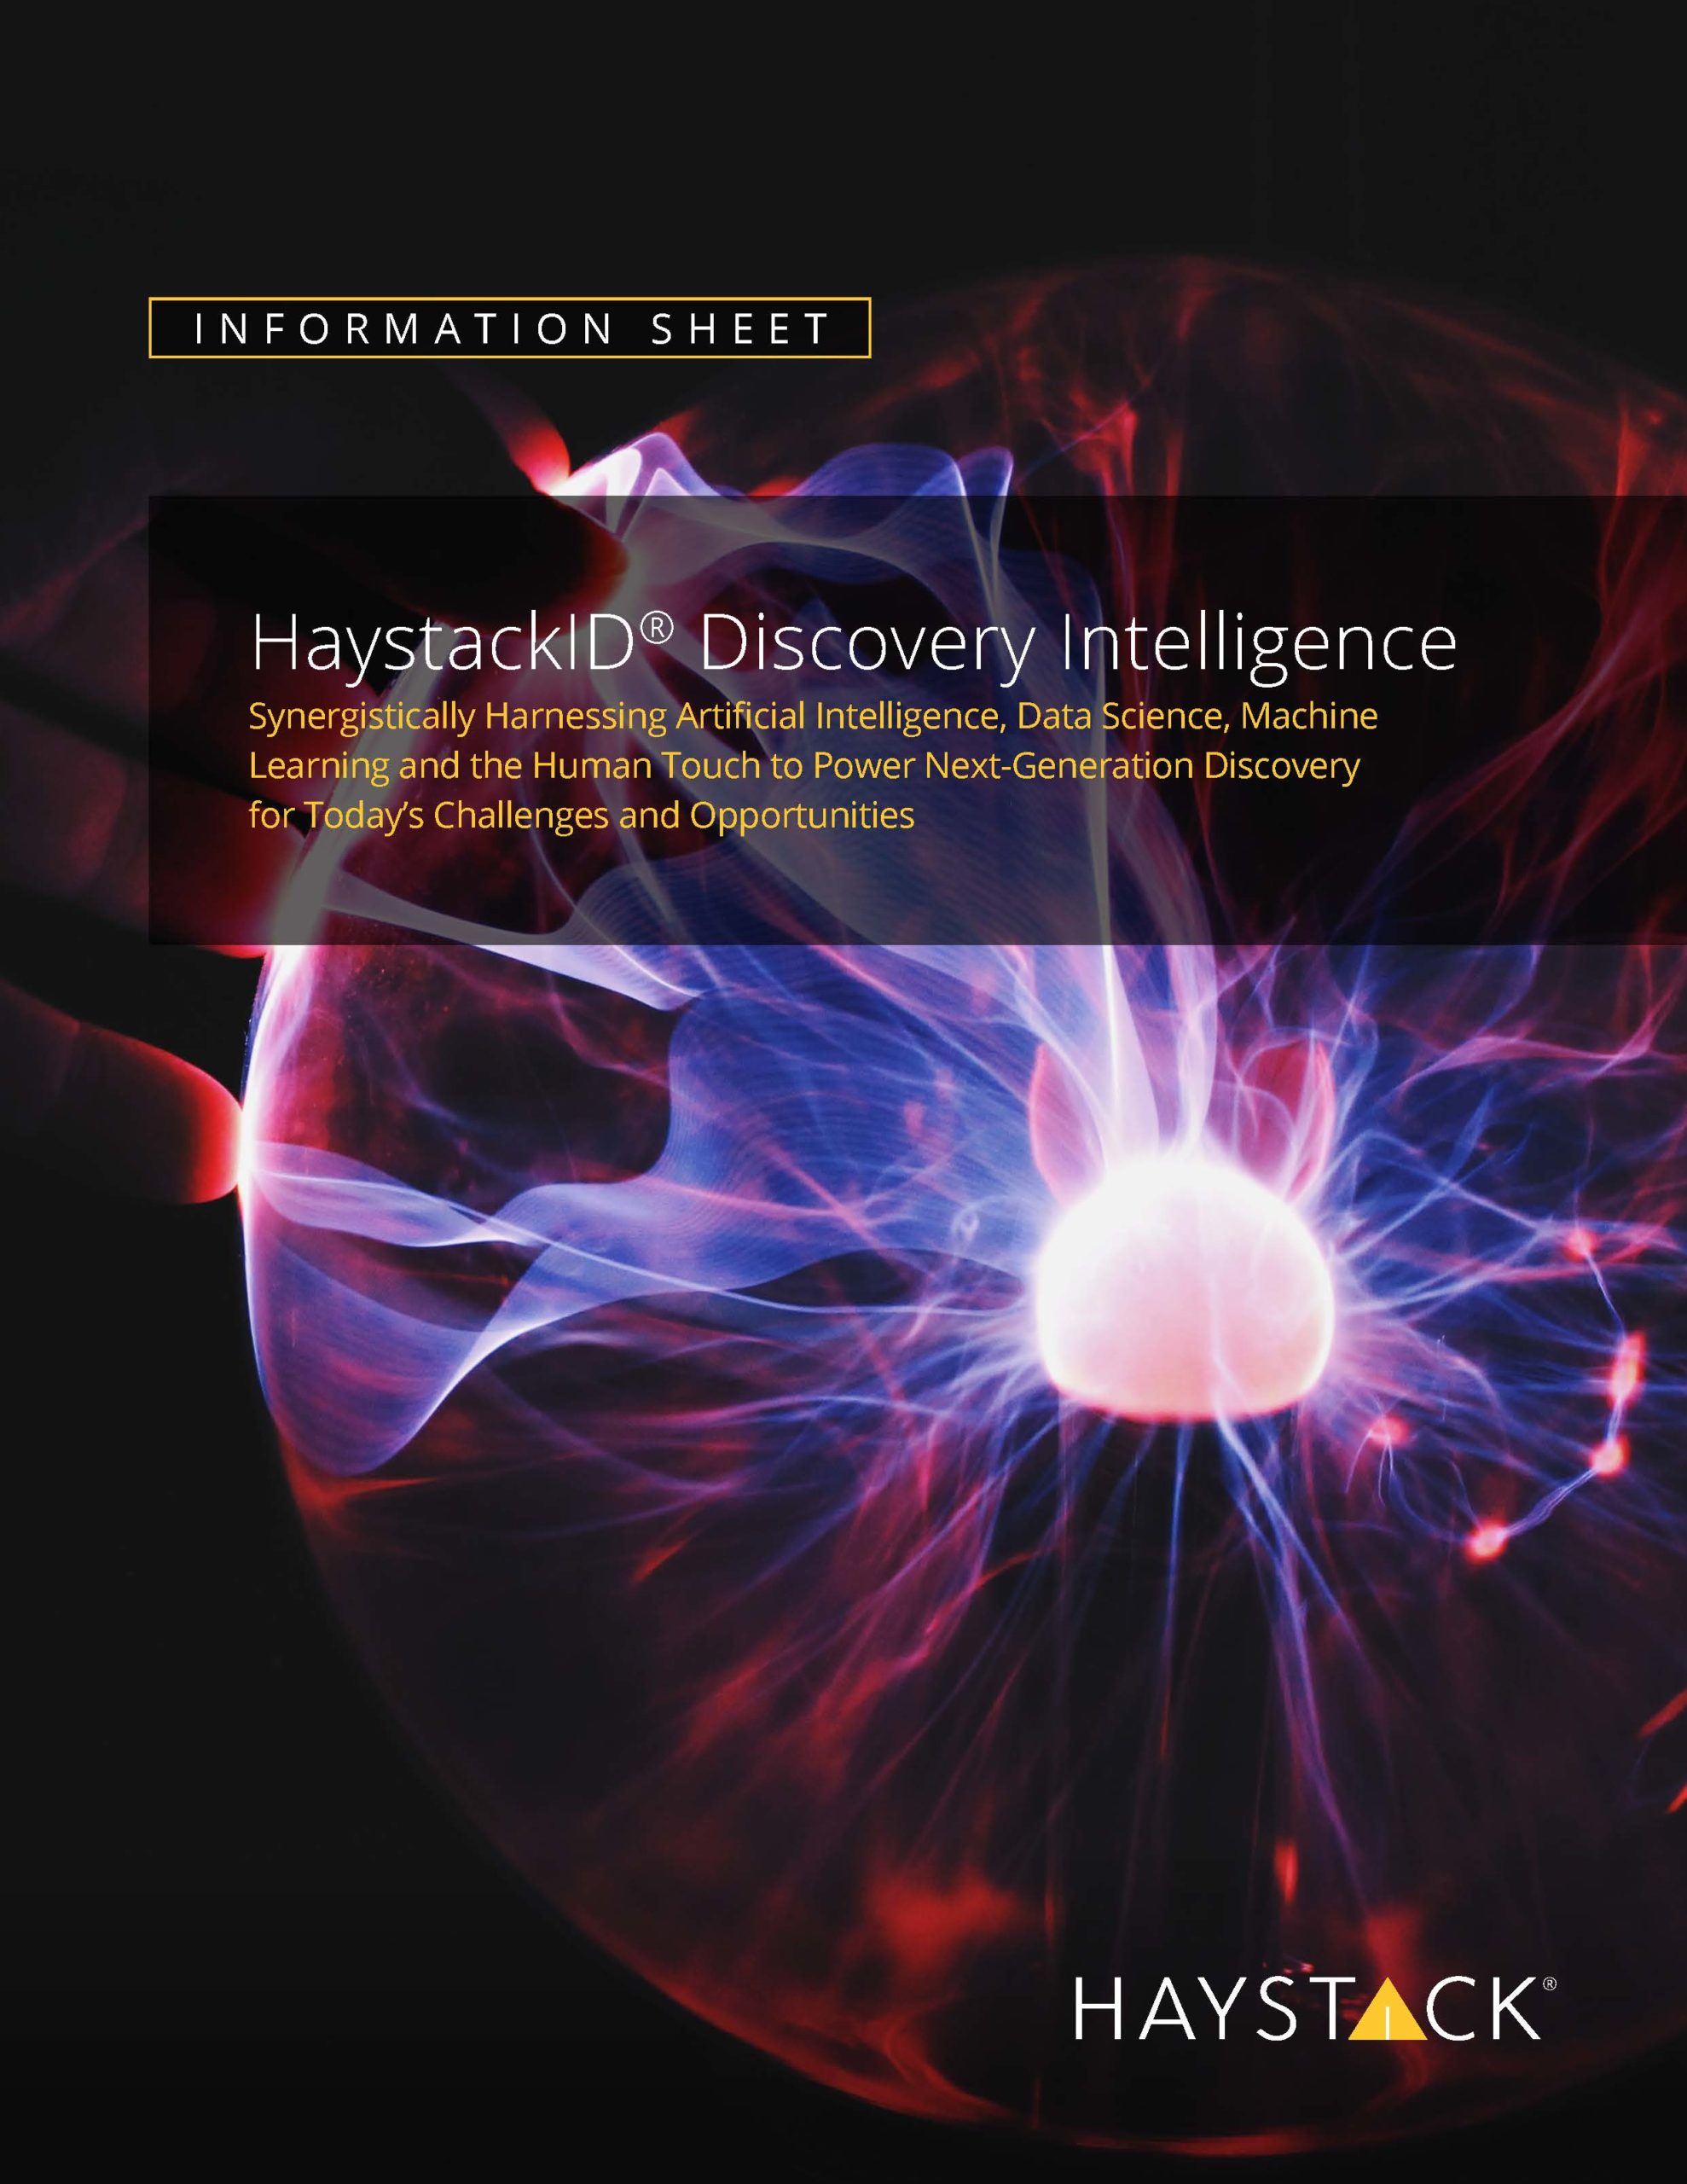 HaystackID Discovery Intelligence